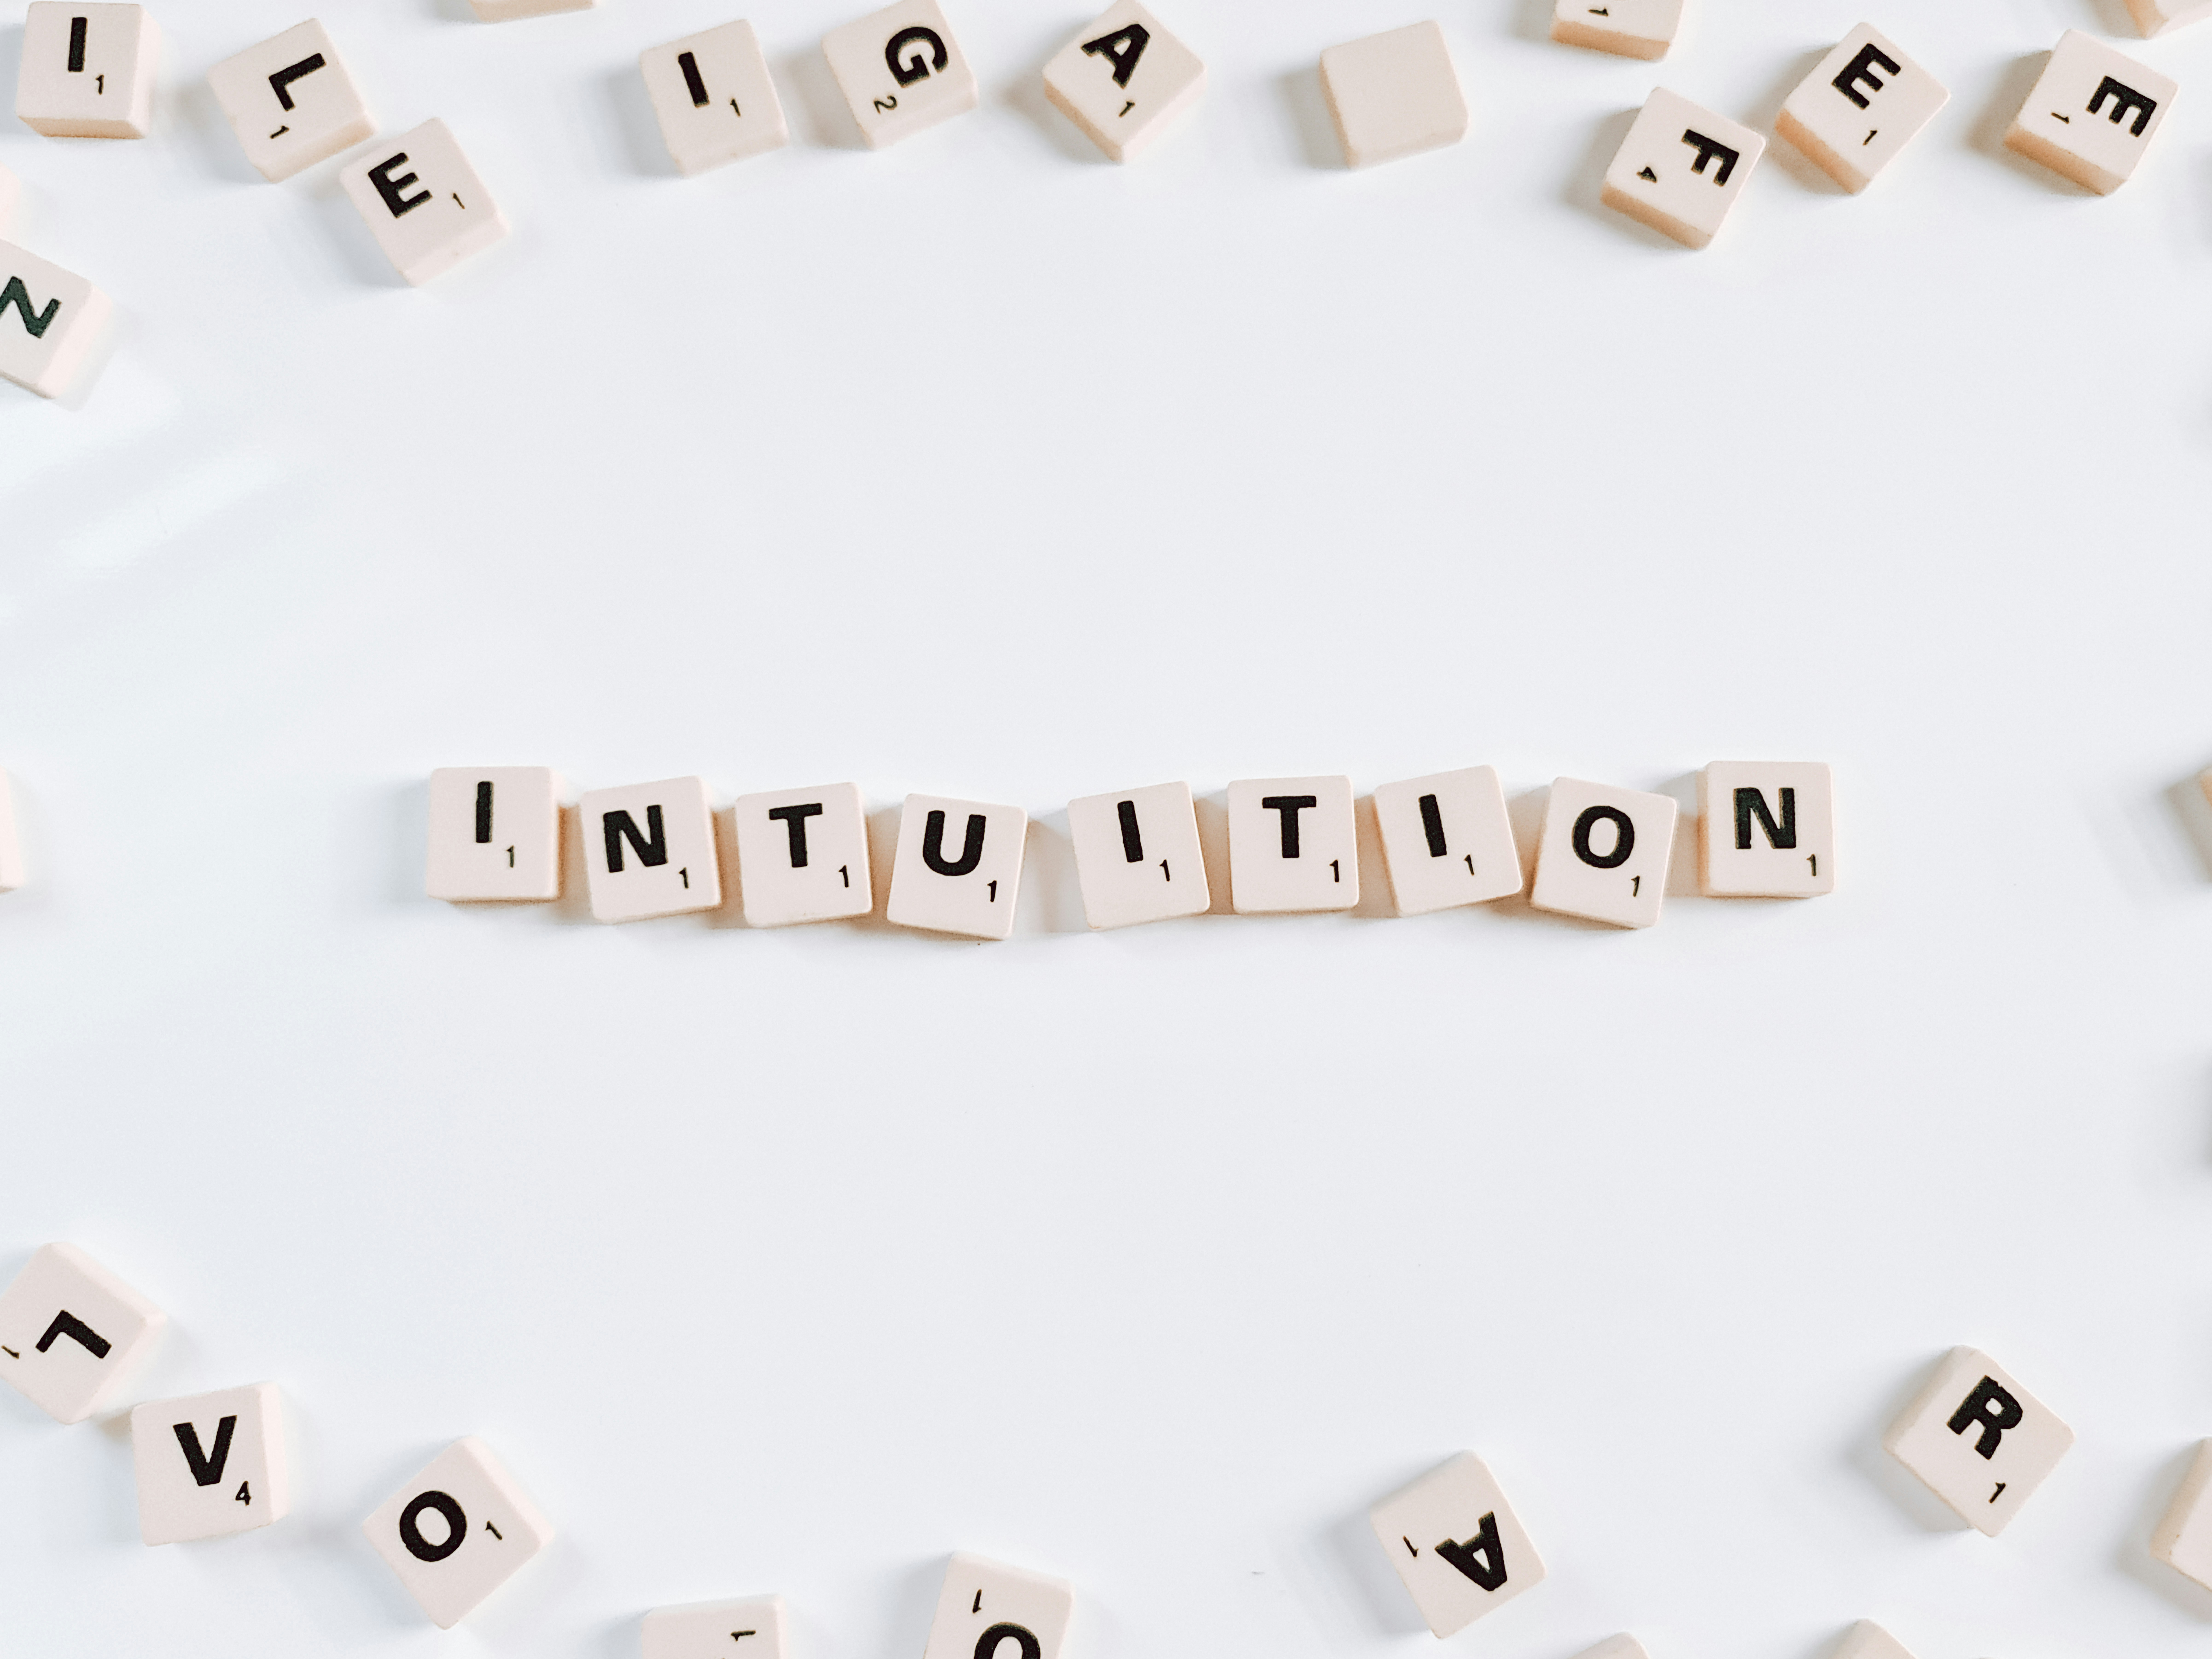 Intuition spelled out using cube blocks